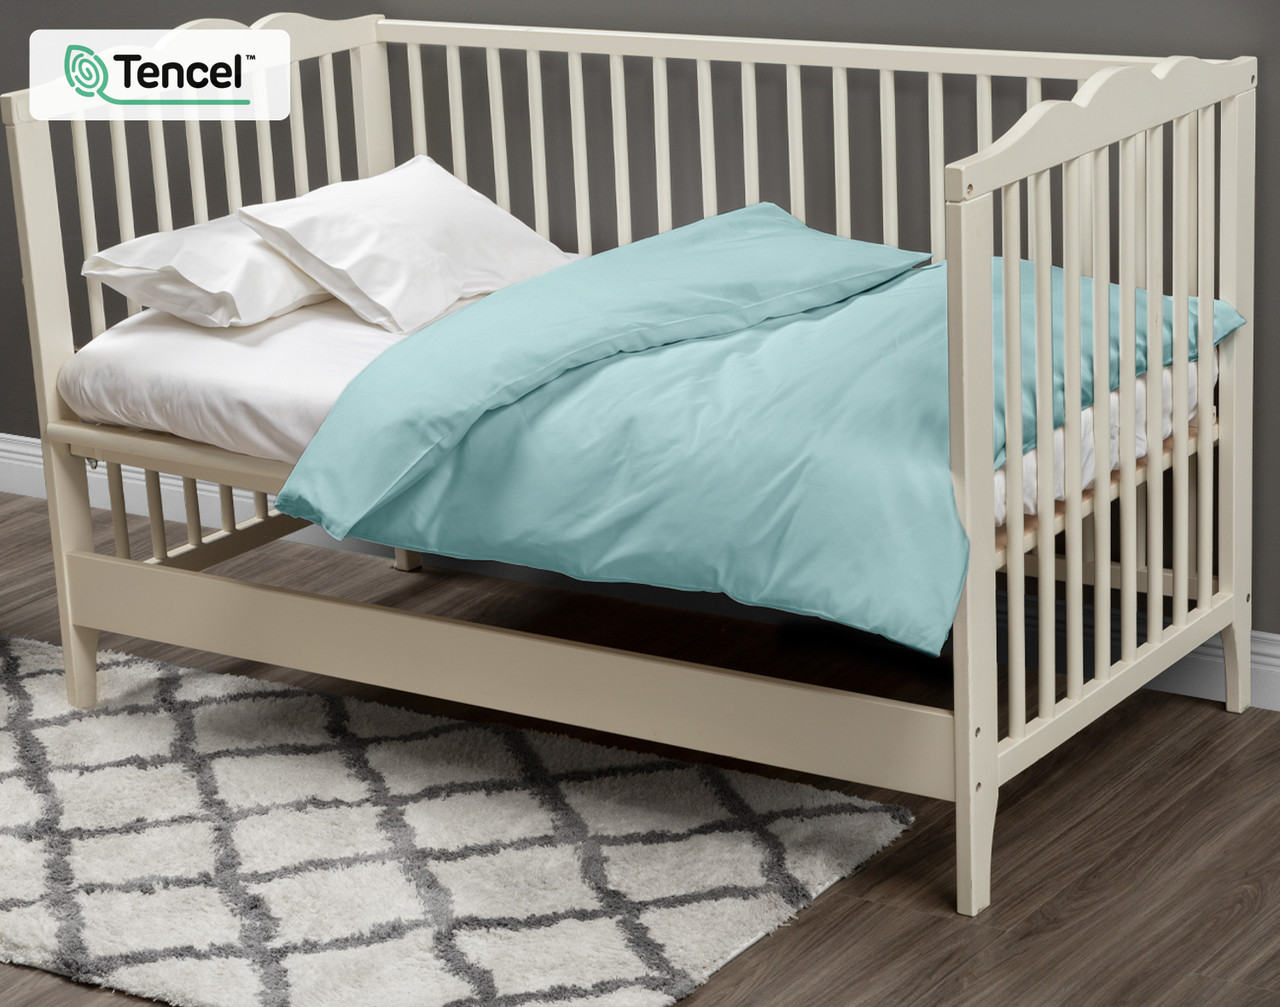 Our Eucalyptus Luxe Crib-Sized Duvet Cover in Shoreline dressed over a small white mattress in a cream white crib. 